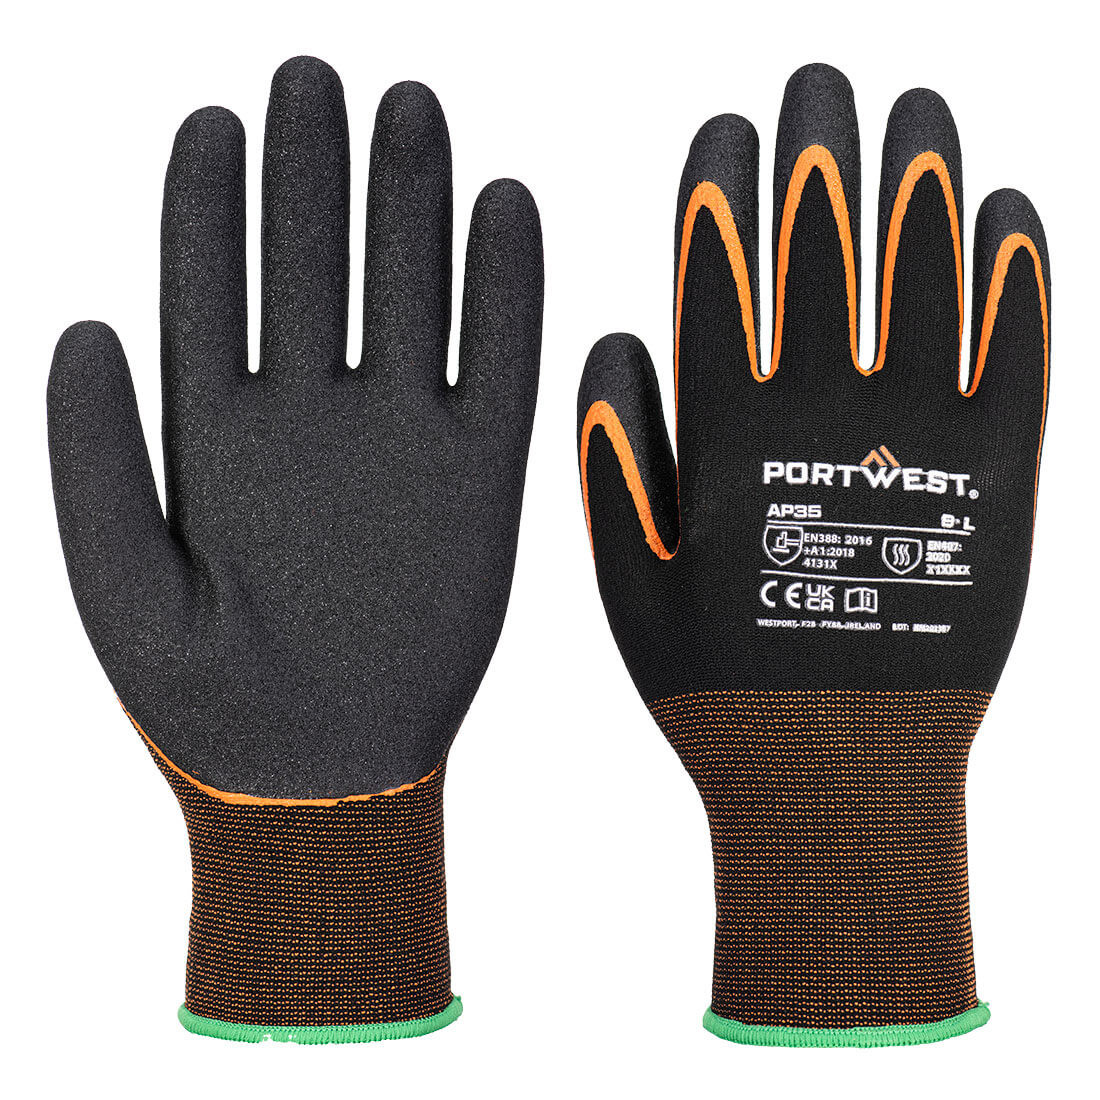 Grip 15 Nitrile Double Palm Glove - Personal protection